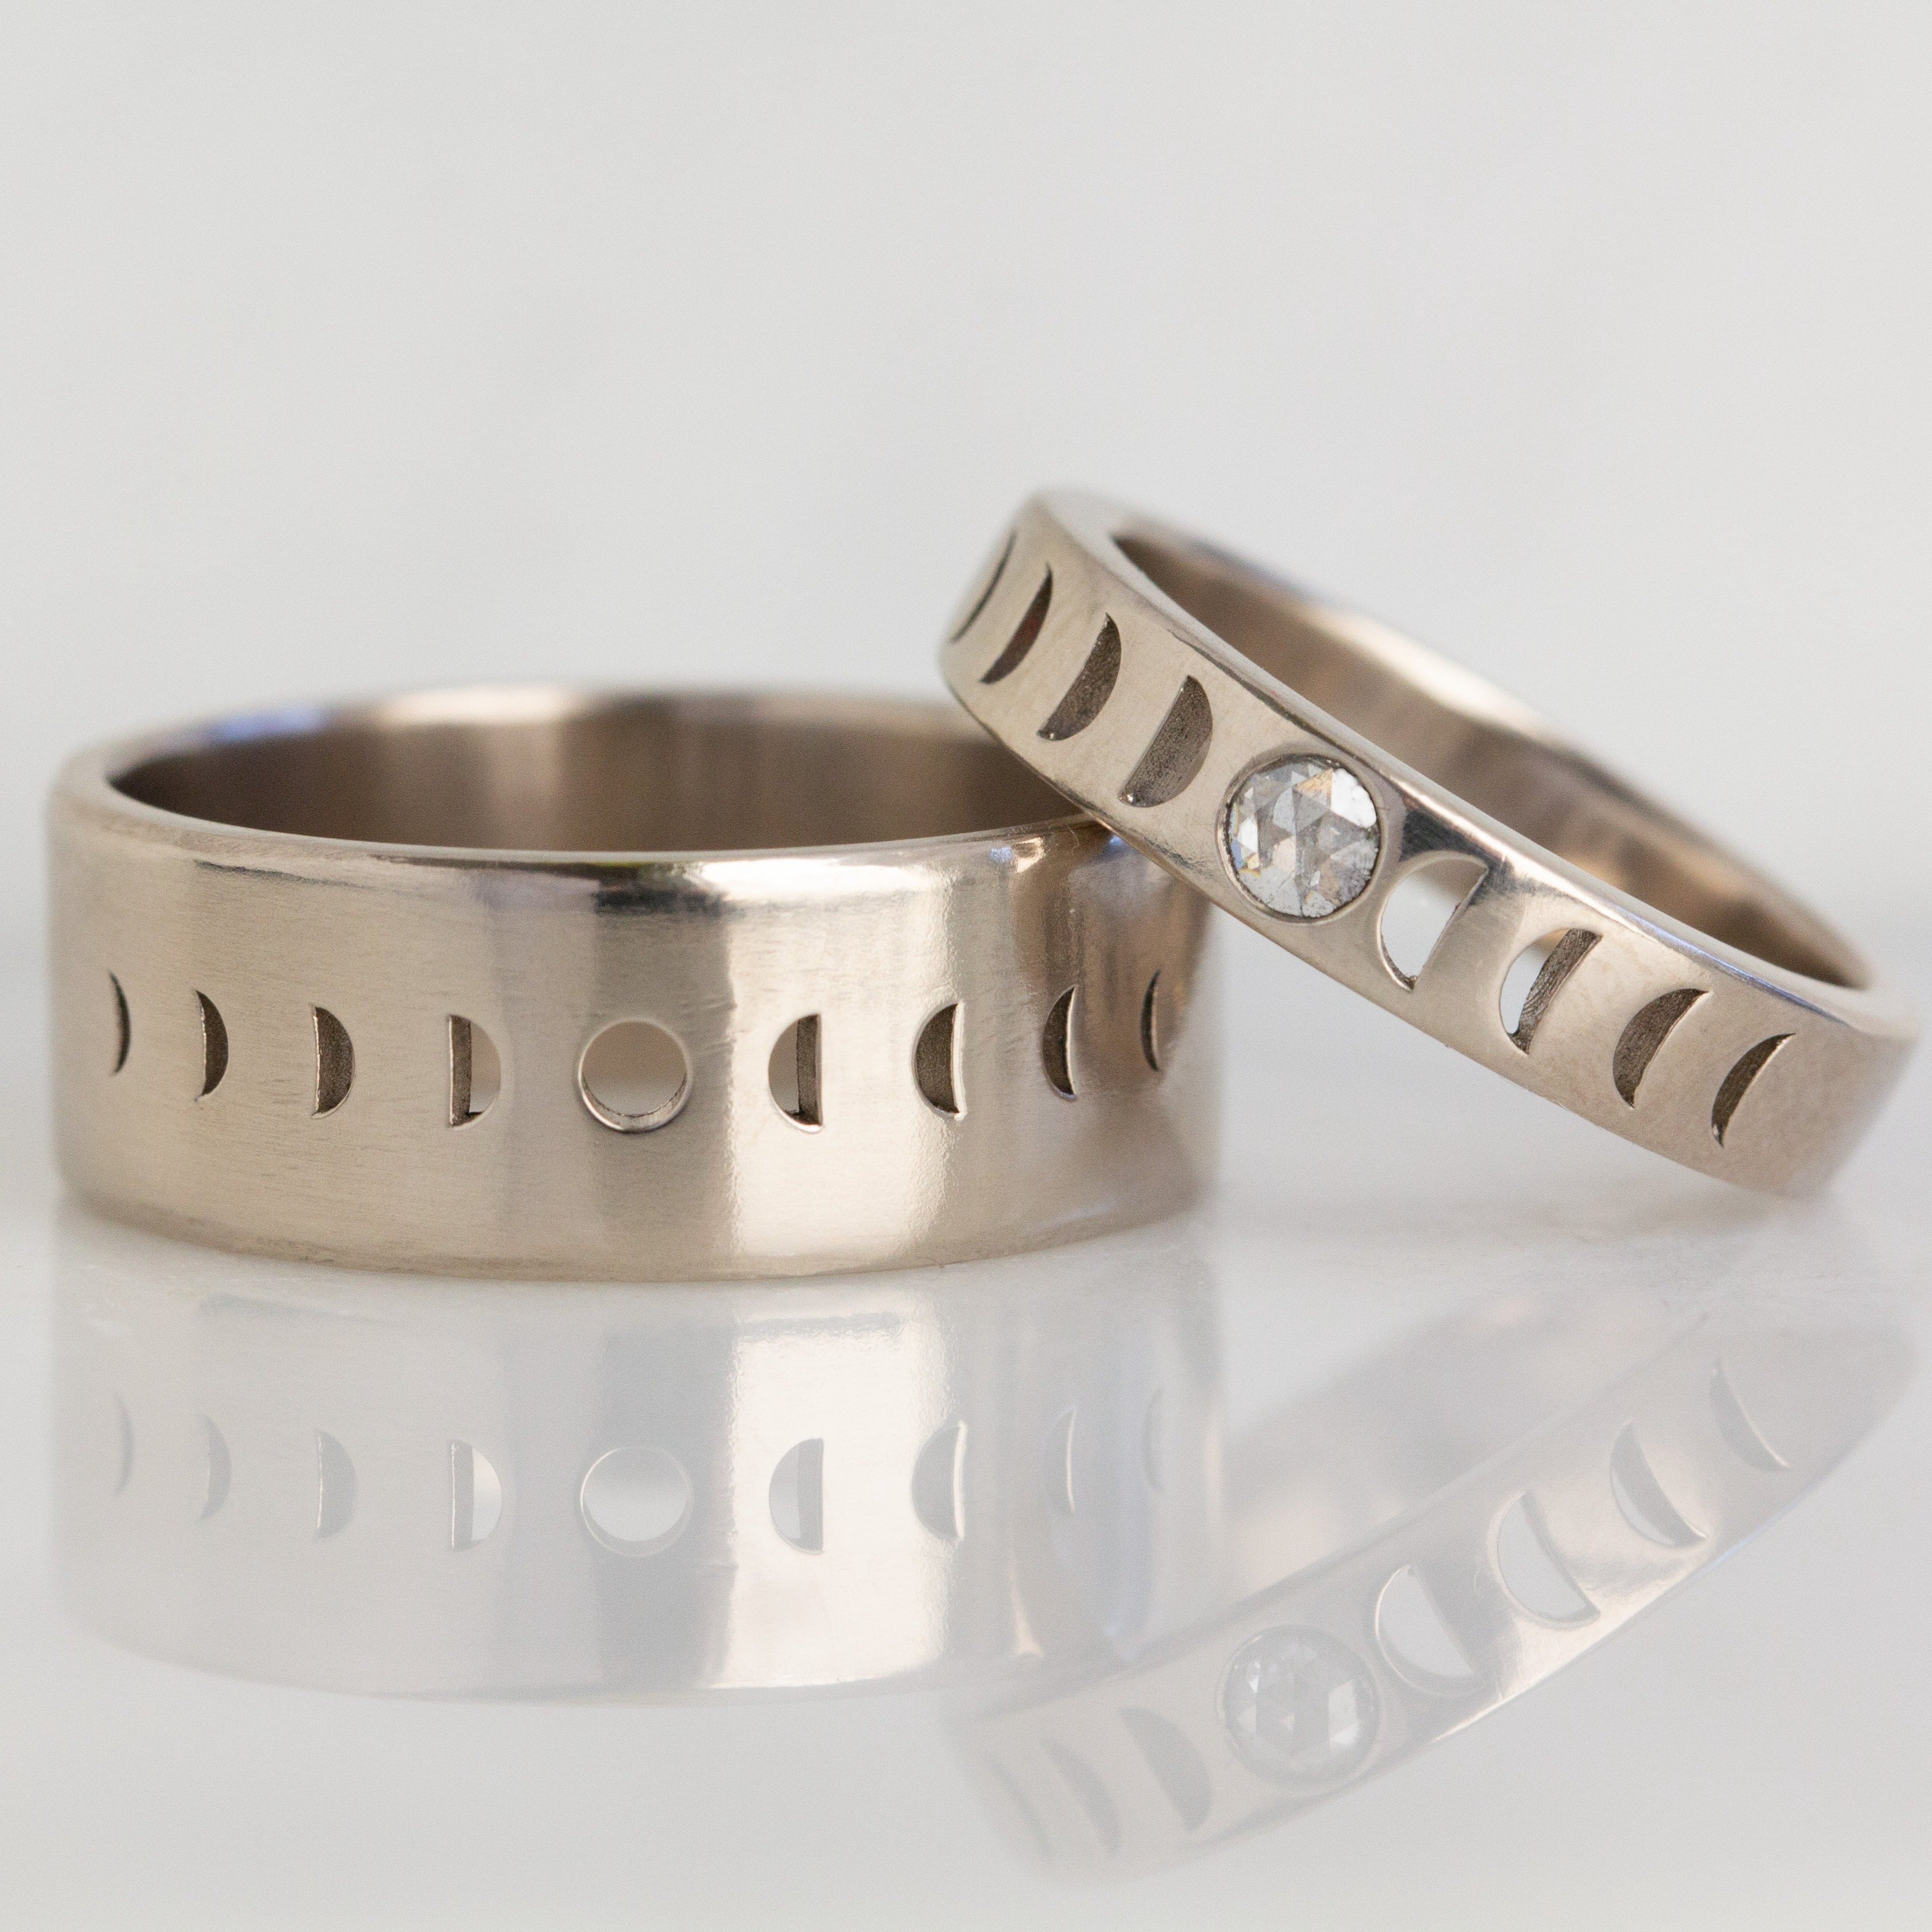 Moon Phase Rings moon phase rings > stacking rings > wedding bands > gender neutral bands > rose cut diamond ring > promise rings >lunar phase ring > moon ring > phases of the moon ring Eclipse Moon phase ring | gender neutral wide band | 18k palladium